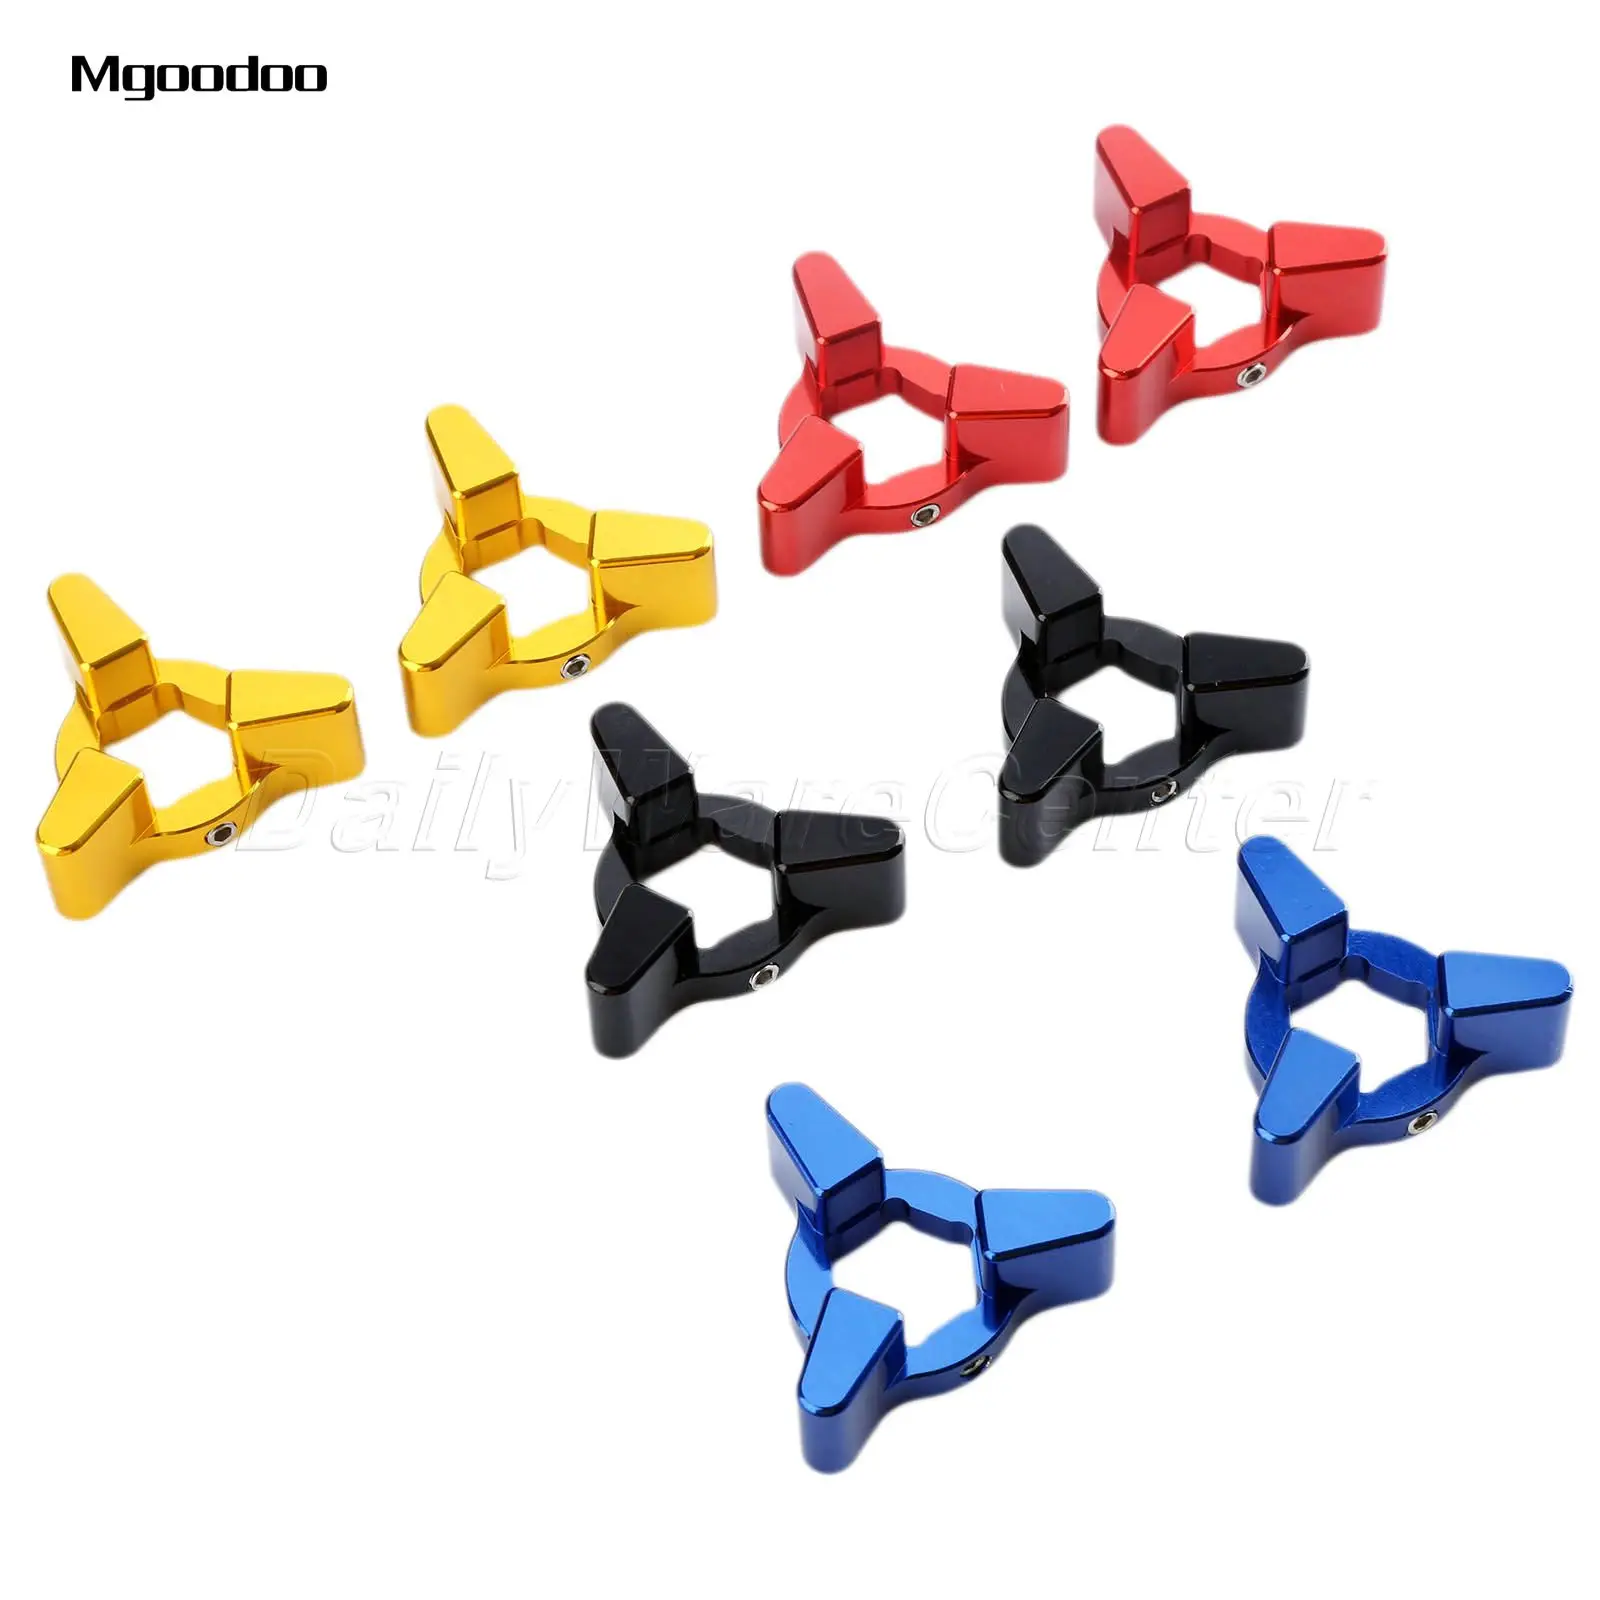 

14mm Motorcycle Fork Preload Adjusters CNC Aluminum For Kawasaki Z750 ZX10R Suzuki GSXR 1000 Yamaha YZF R1 Motorcycle Accessorie